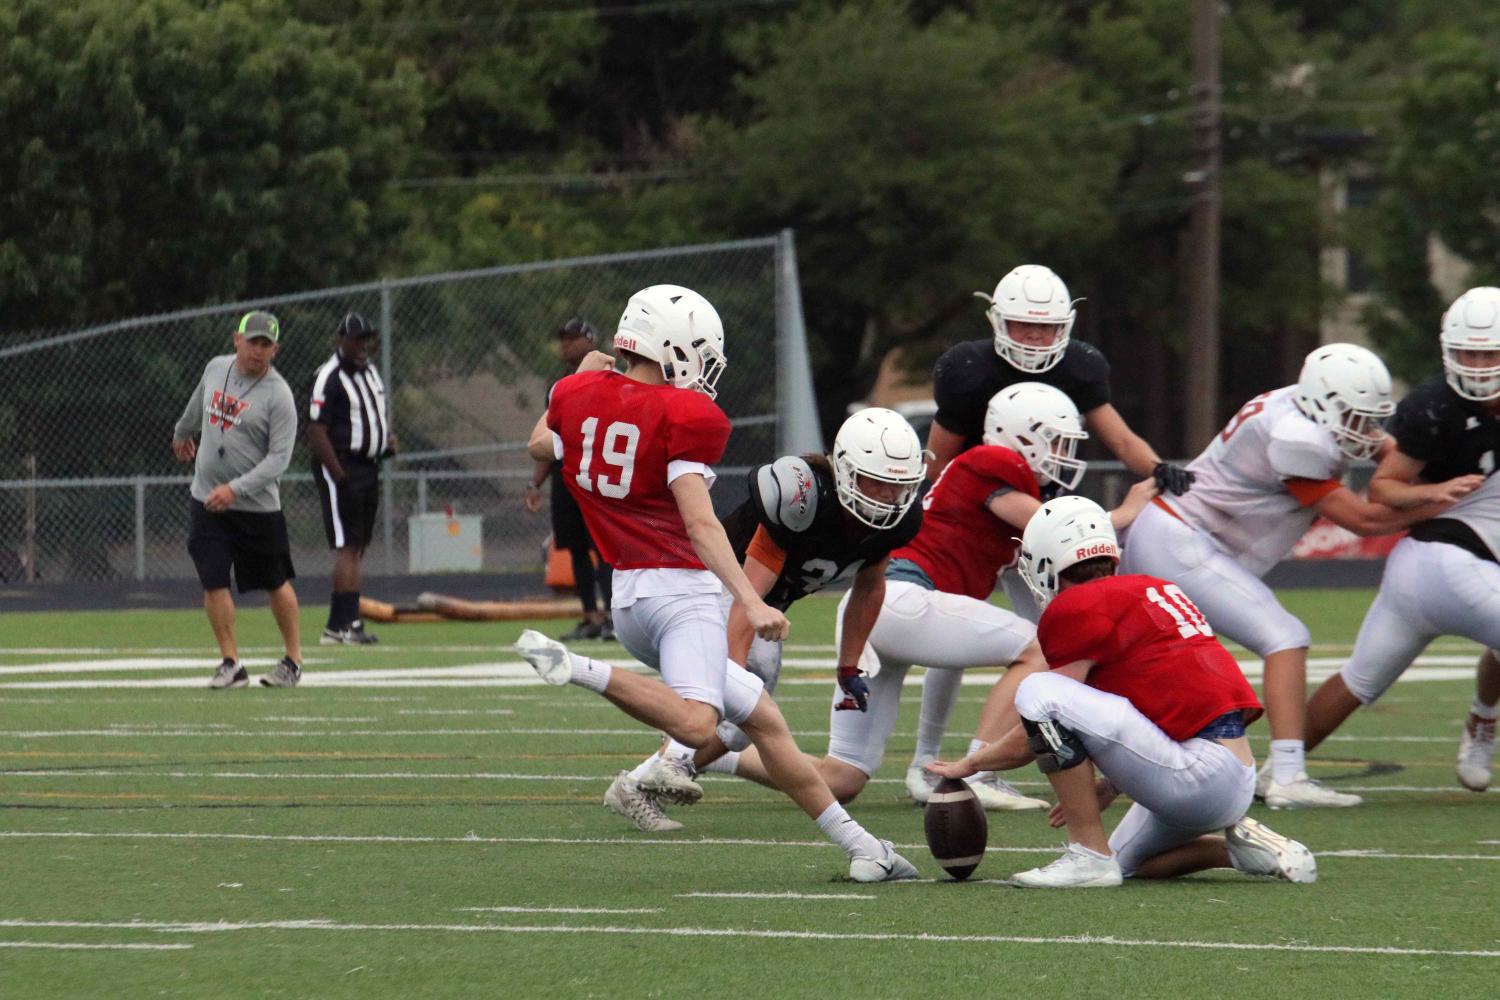 GALLERY%3A+Football+Plays+Second+Scrimmage+of+Spring+Season